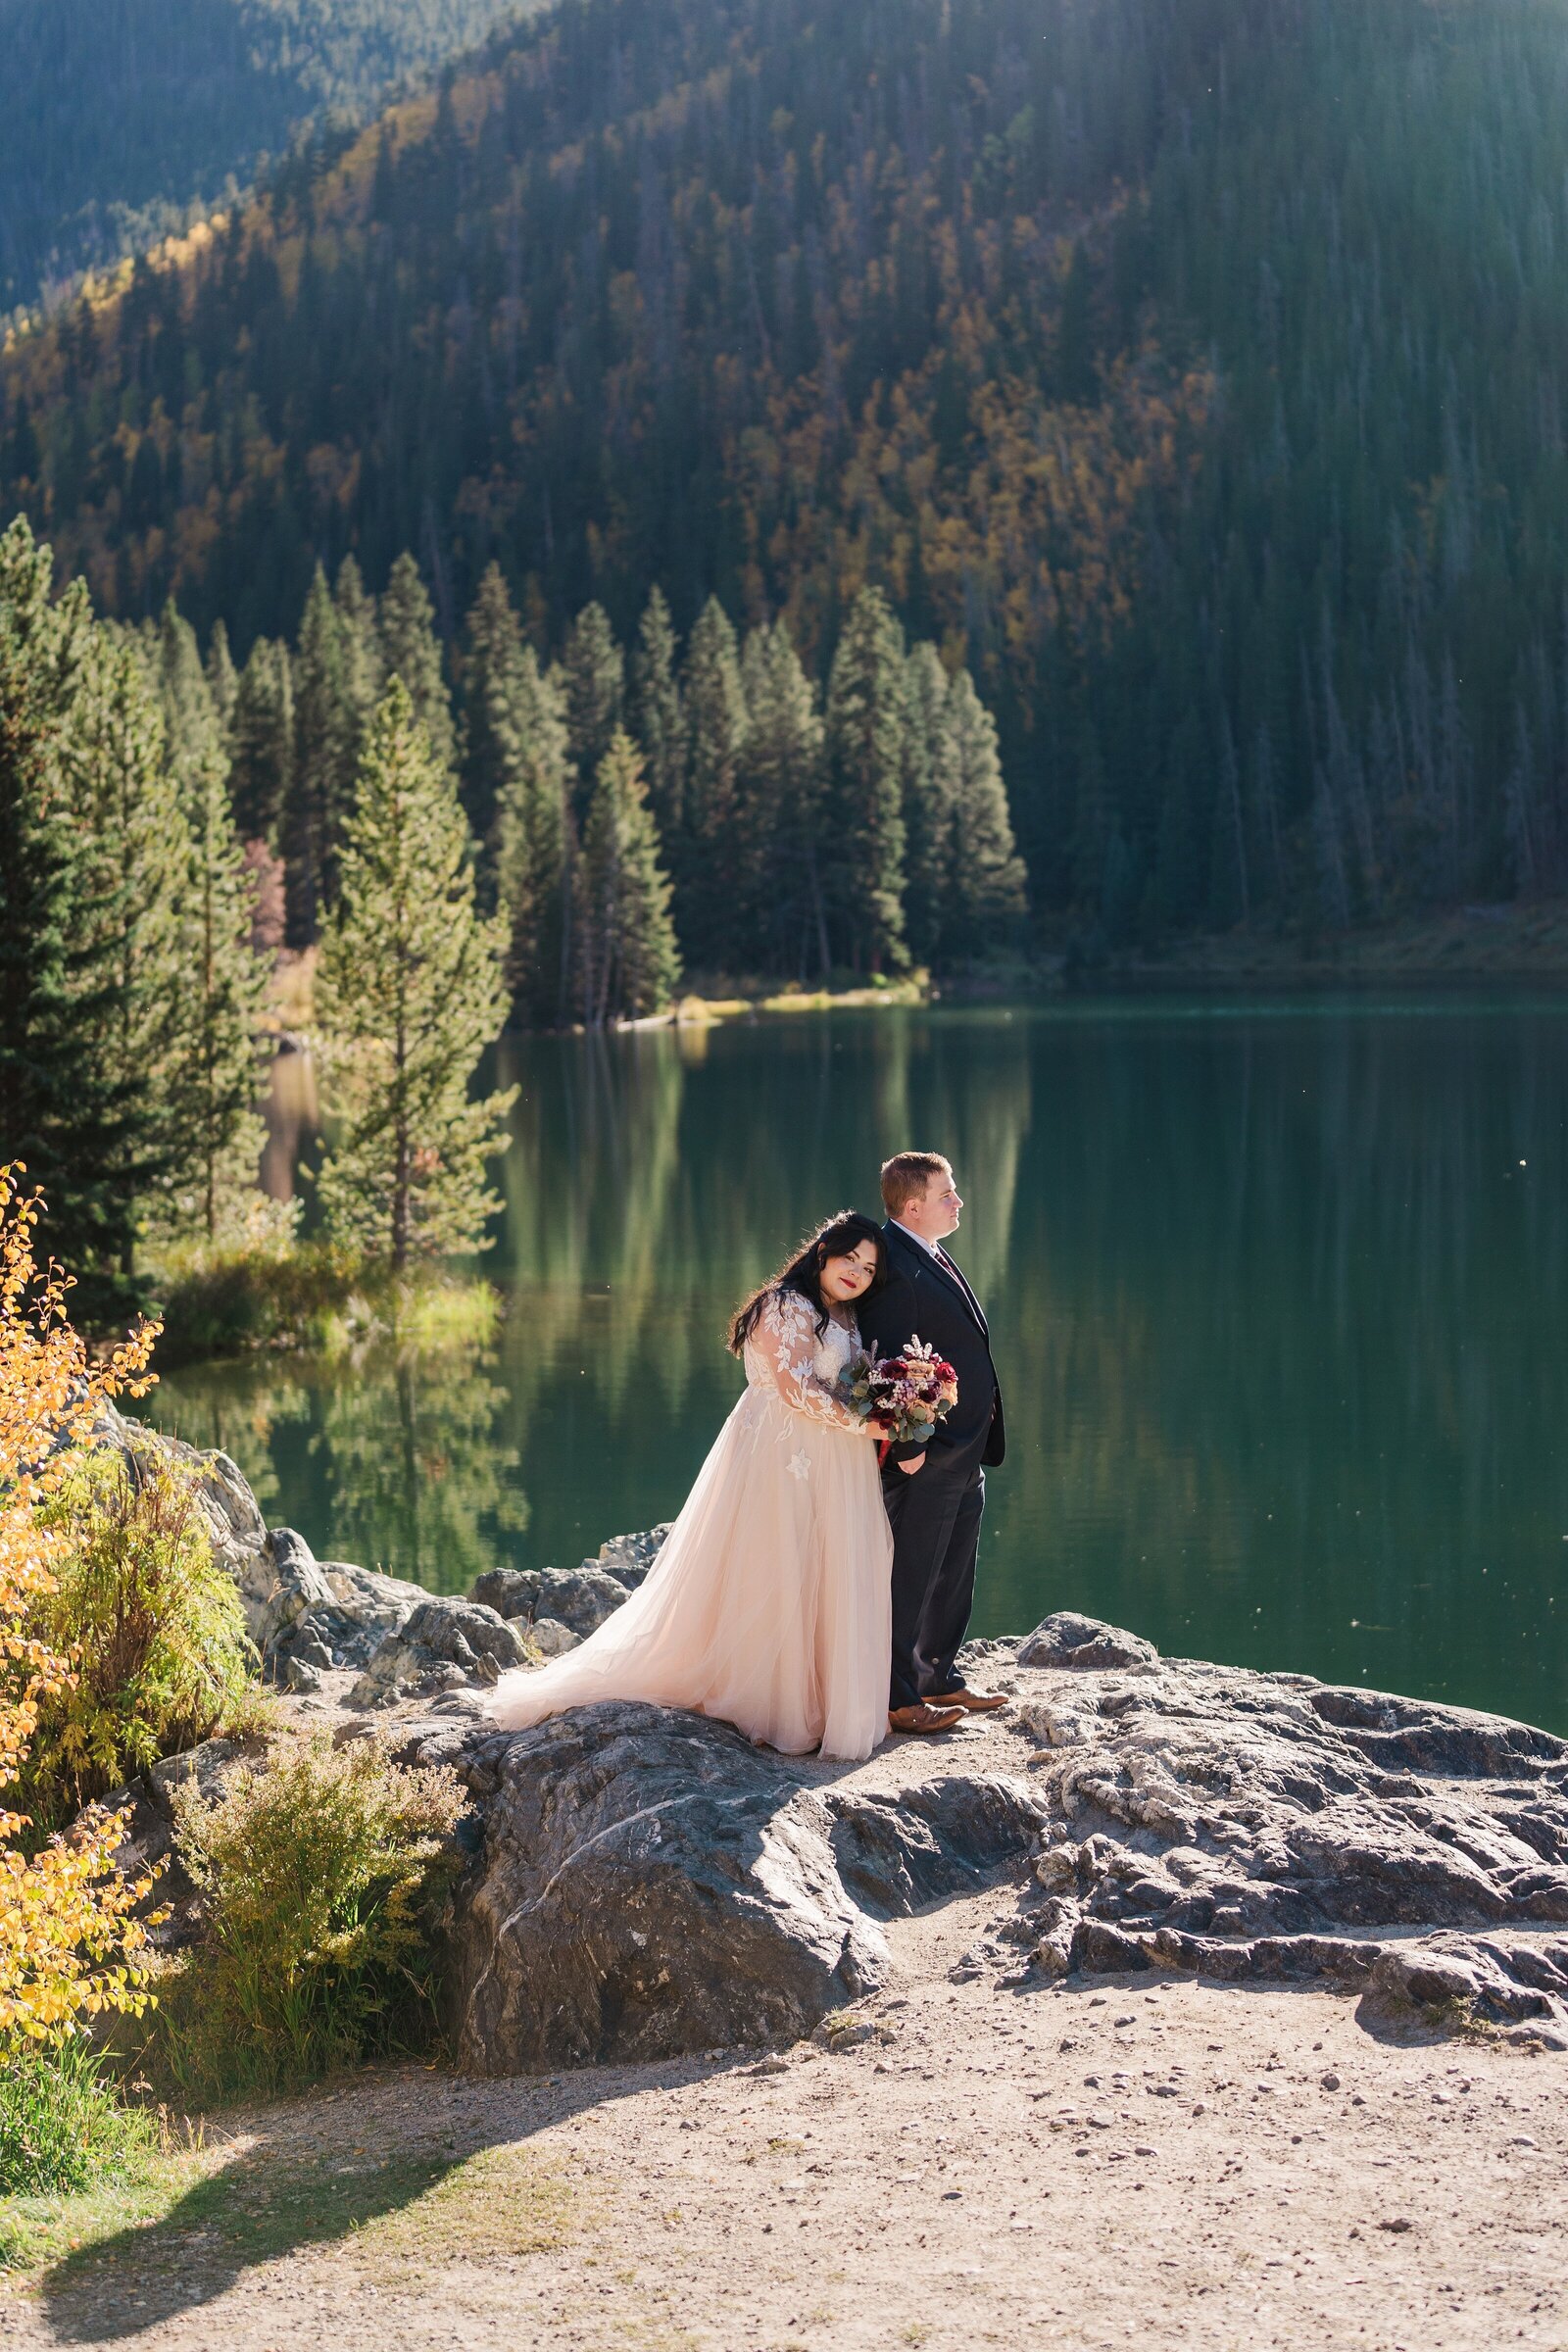 Capturing the Candid Moments: Colorado Wedding Photography" - Candid wedding photography, natural light photography, personalized wedding photography, professional photography services